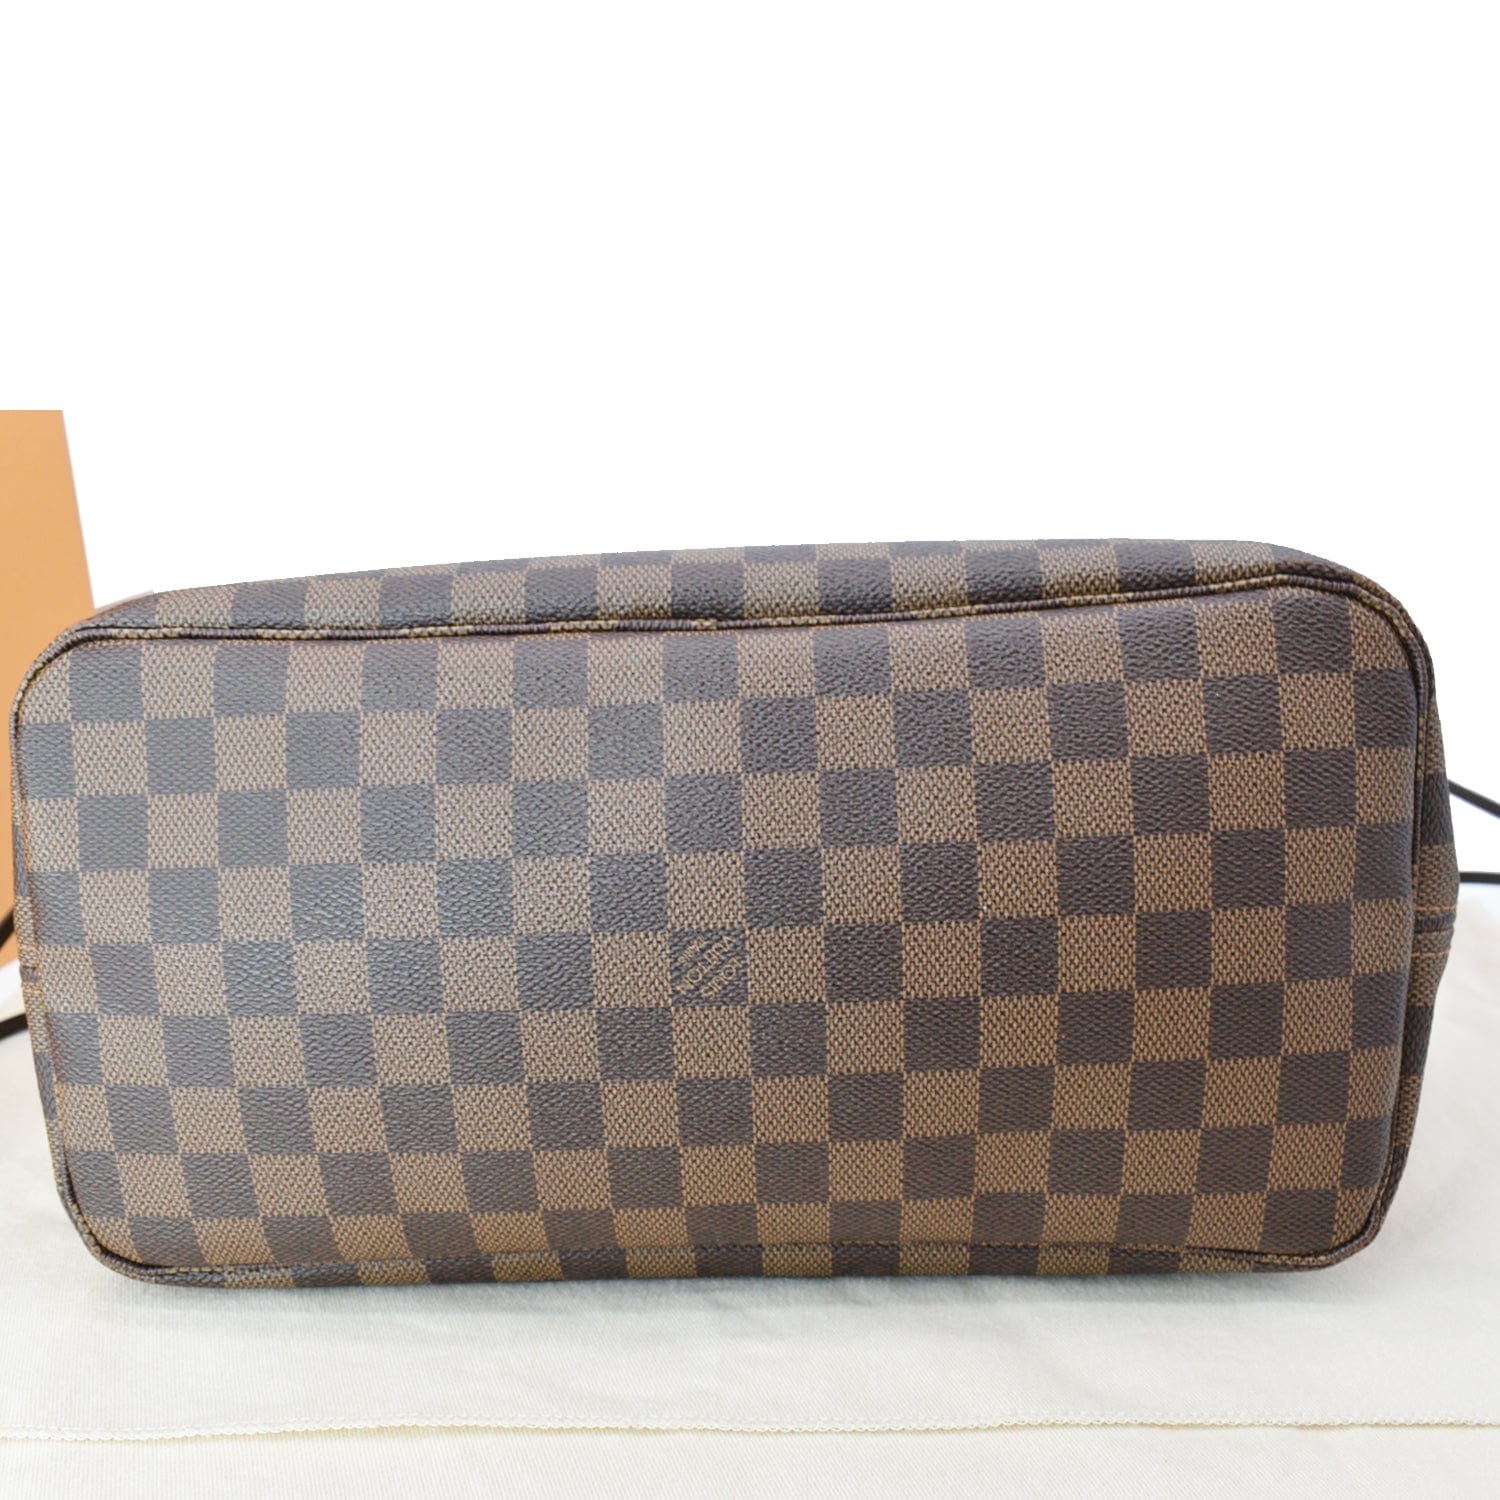 Authentic 2017 Louis Vuitton Neverfull MM Tote Bag in Damier Ebene